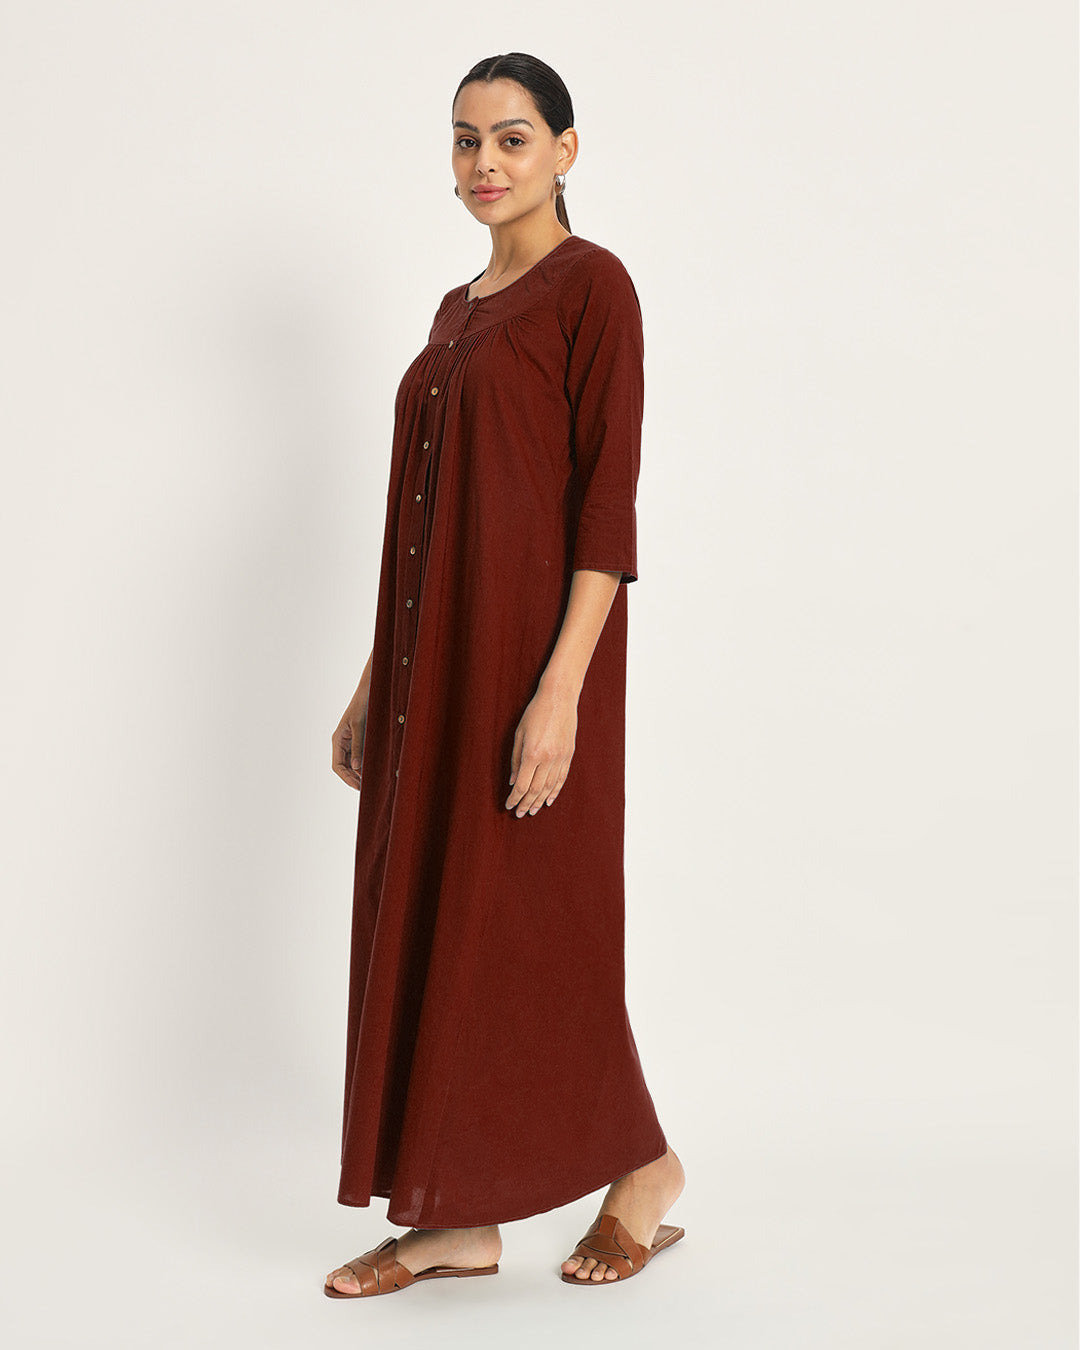 Combo: Black & Russet Red Nighttime Must-Have Nightdress